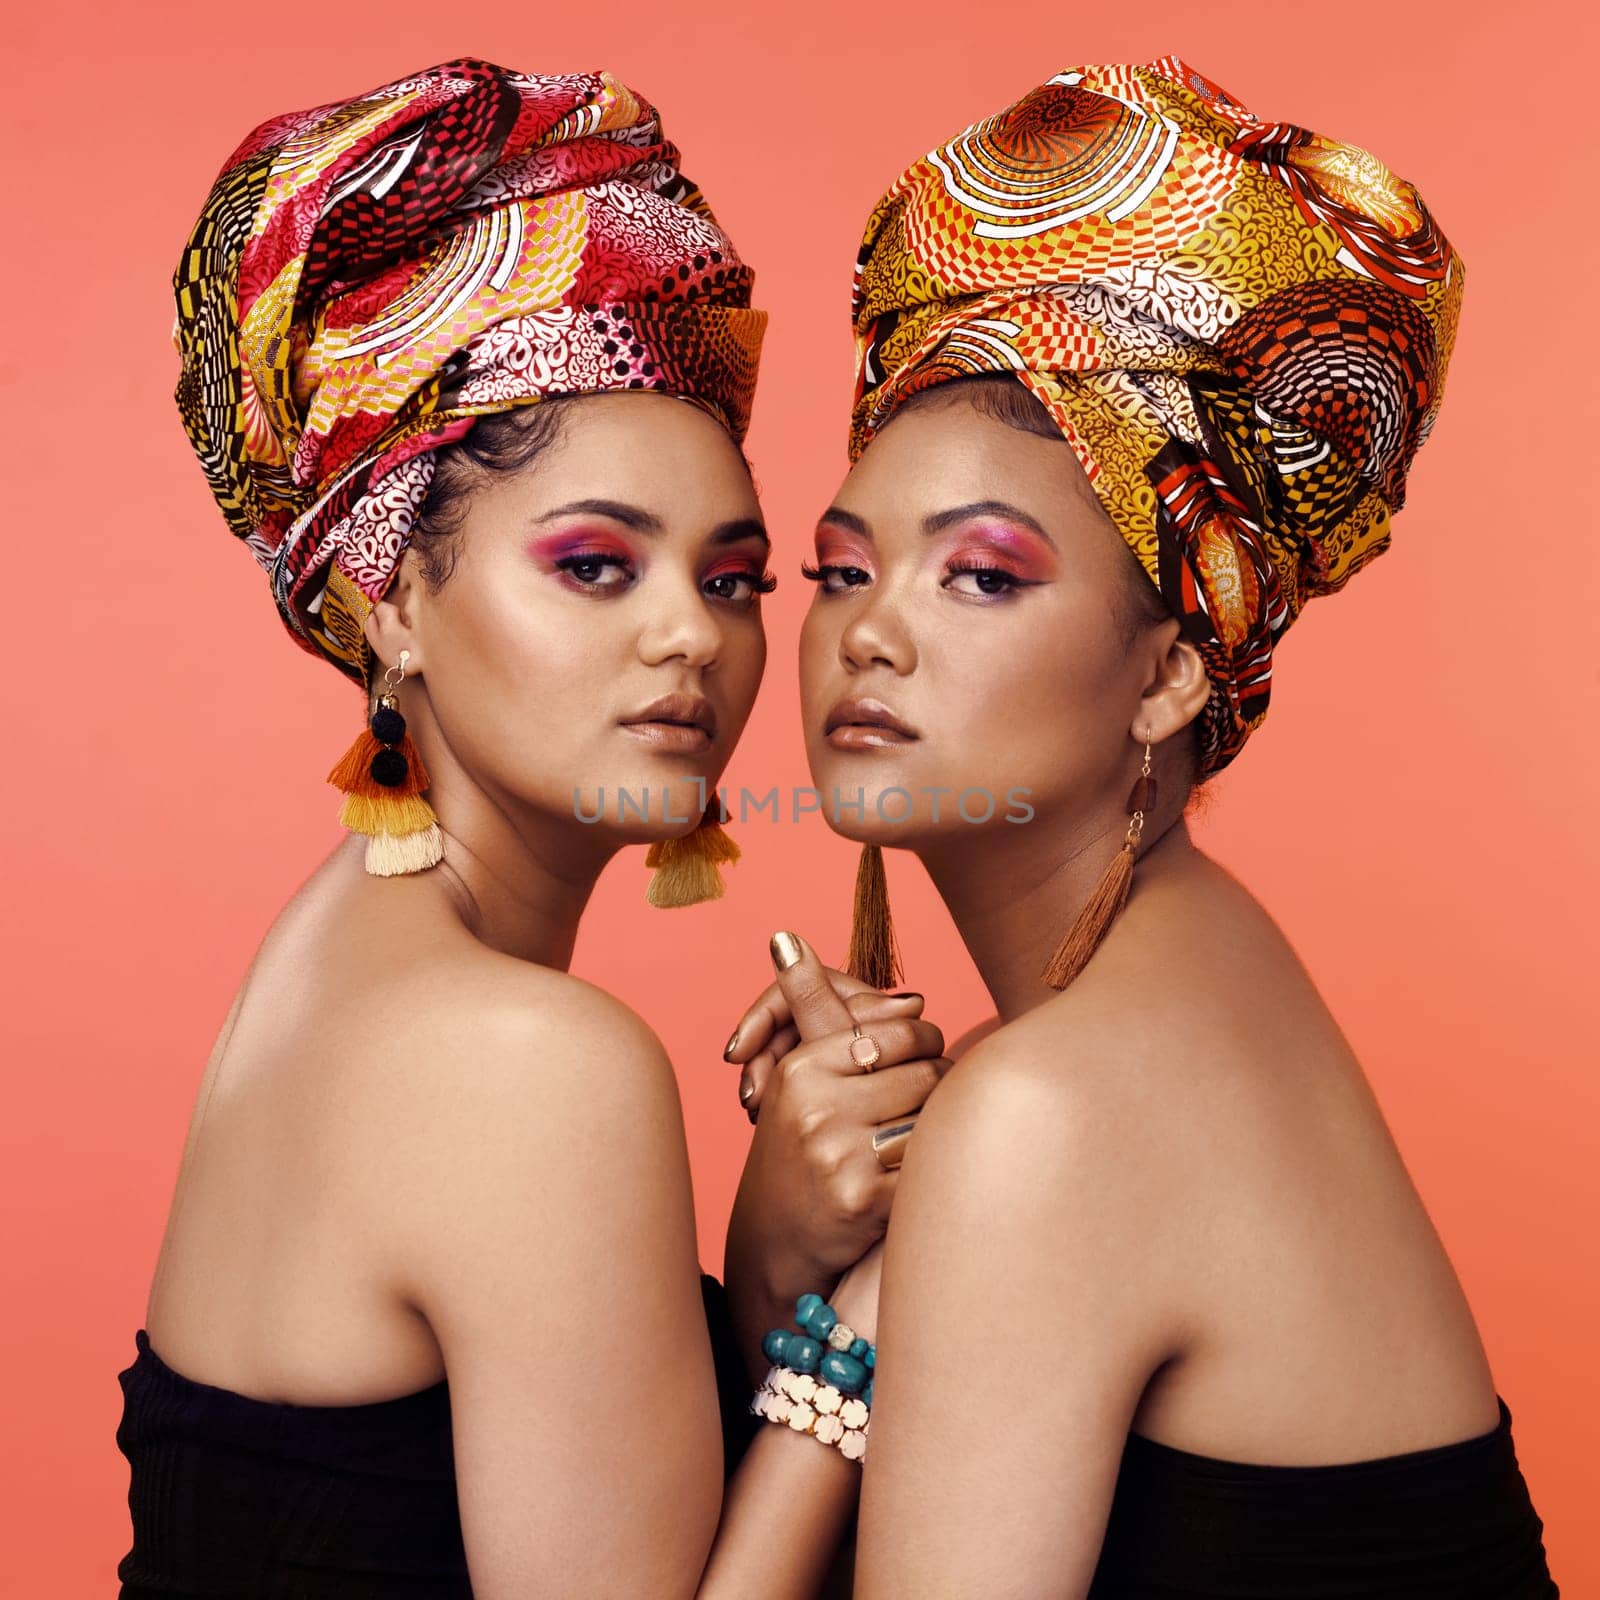 African fashion, makeup and portrait of women on orange background with accessory, makeup and beauty. Glamour, luxury and female people in exotic jewelry, traditional style and head scarf in studio.